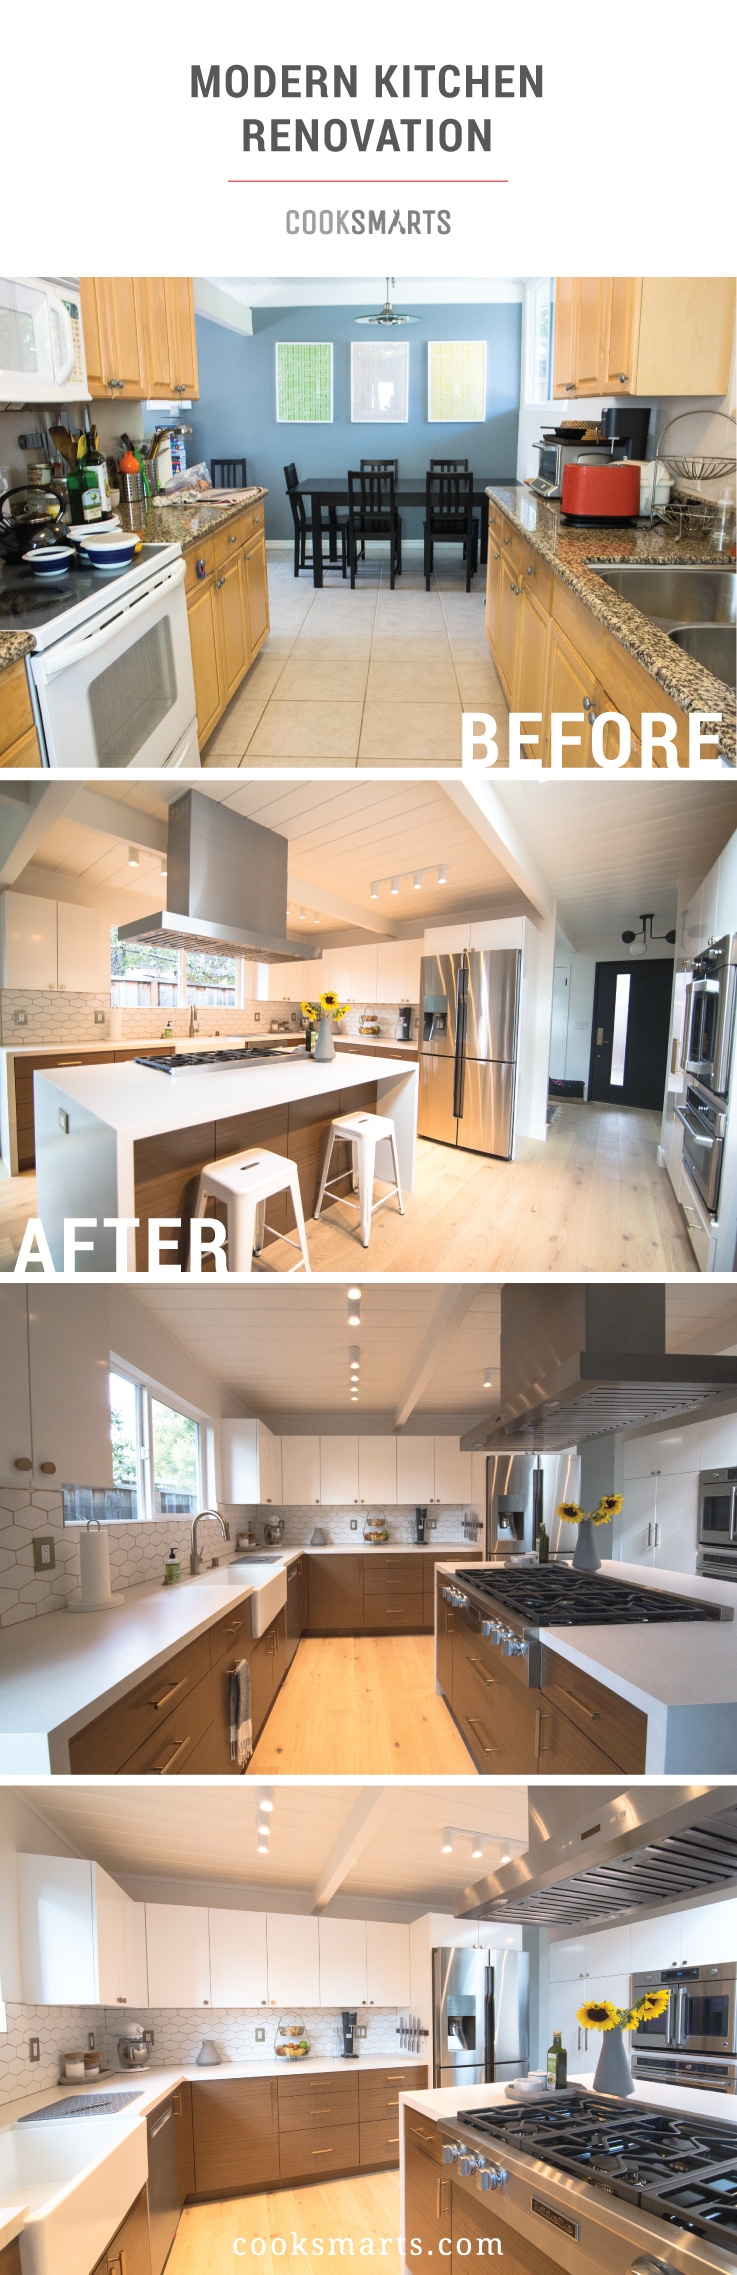 Before and After Kitchen Renovation via @cooksmarts